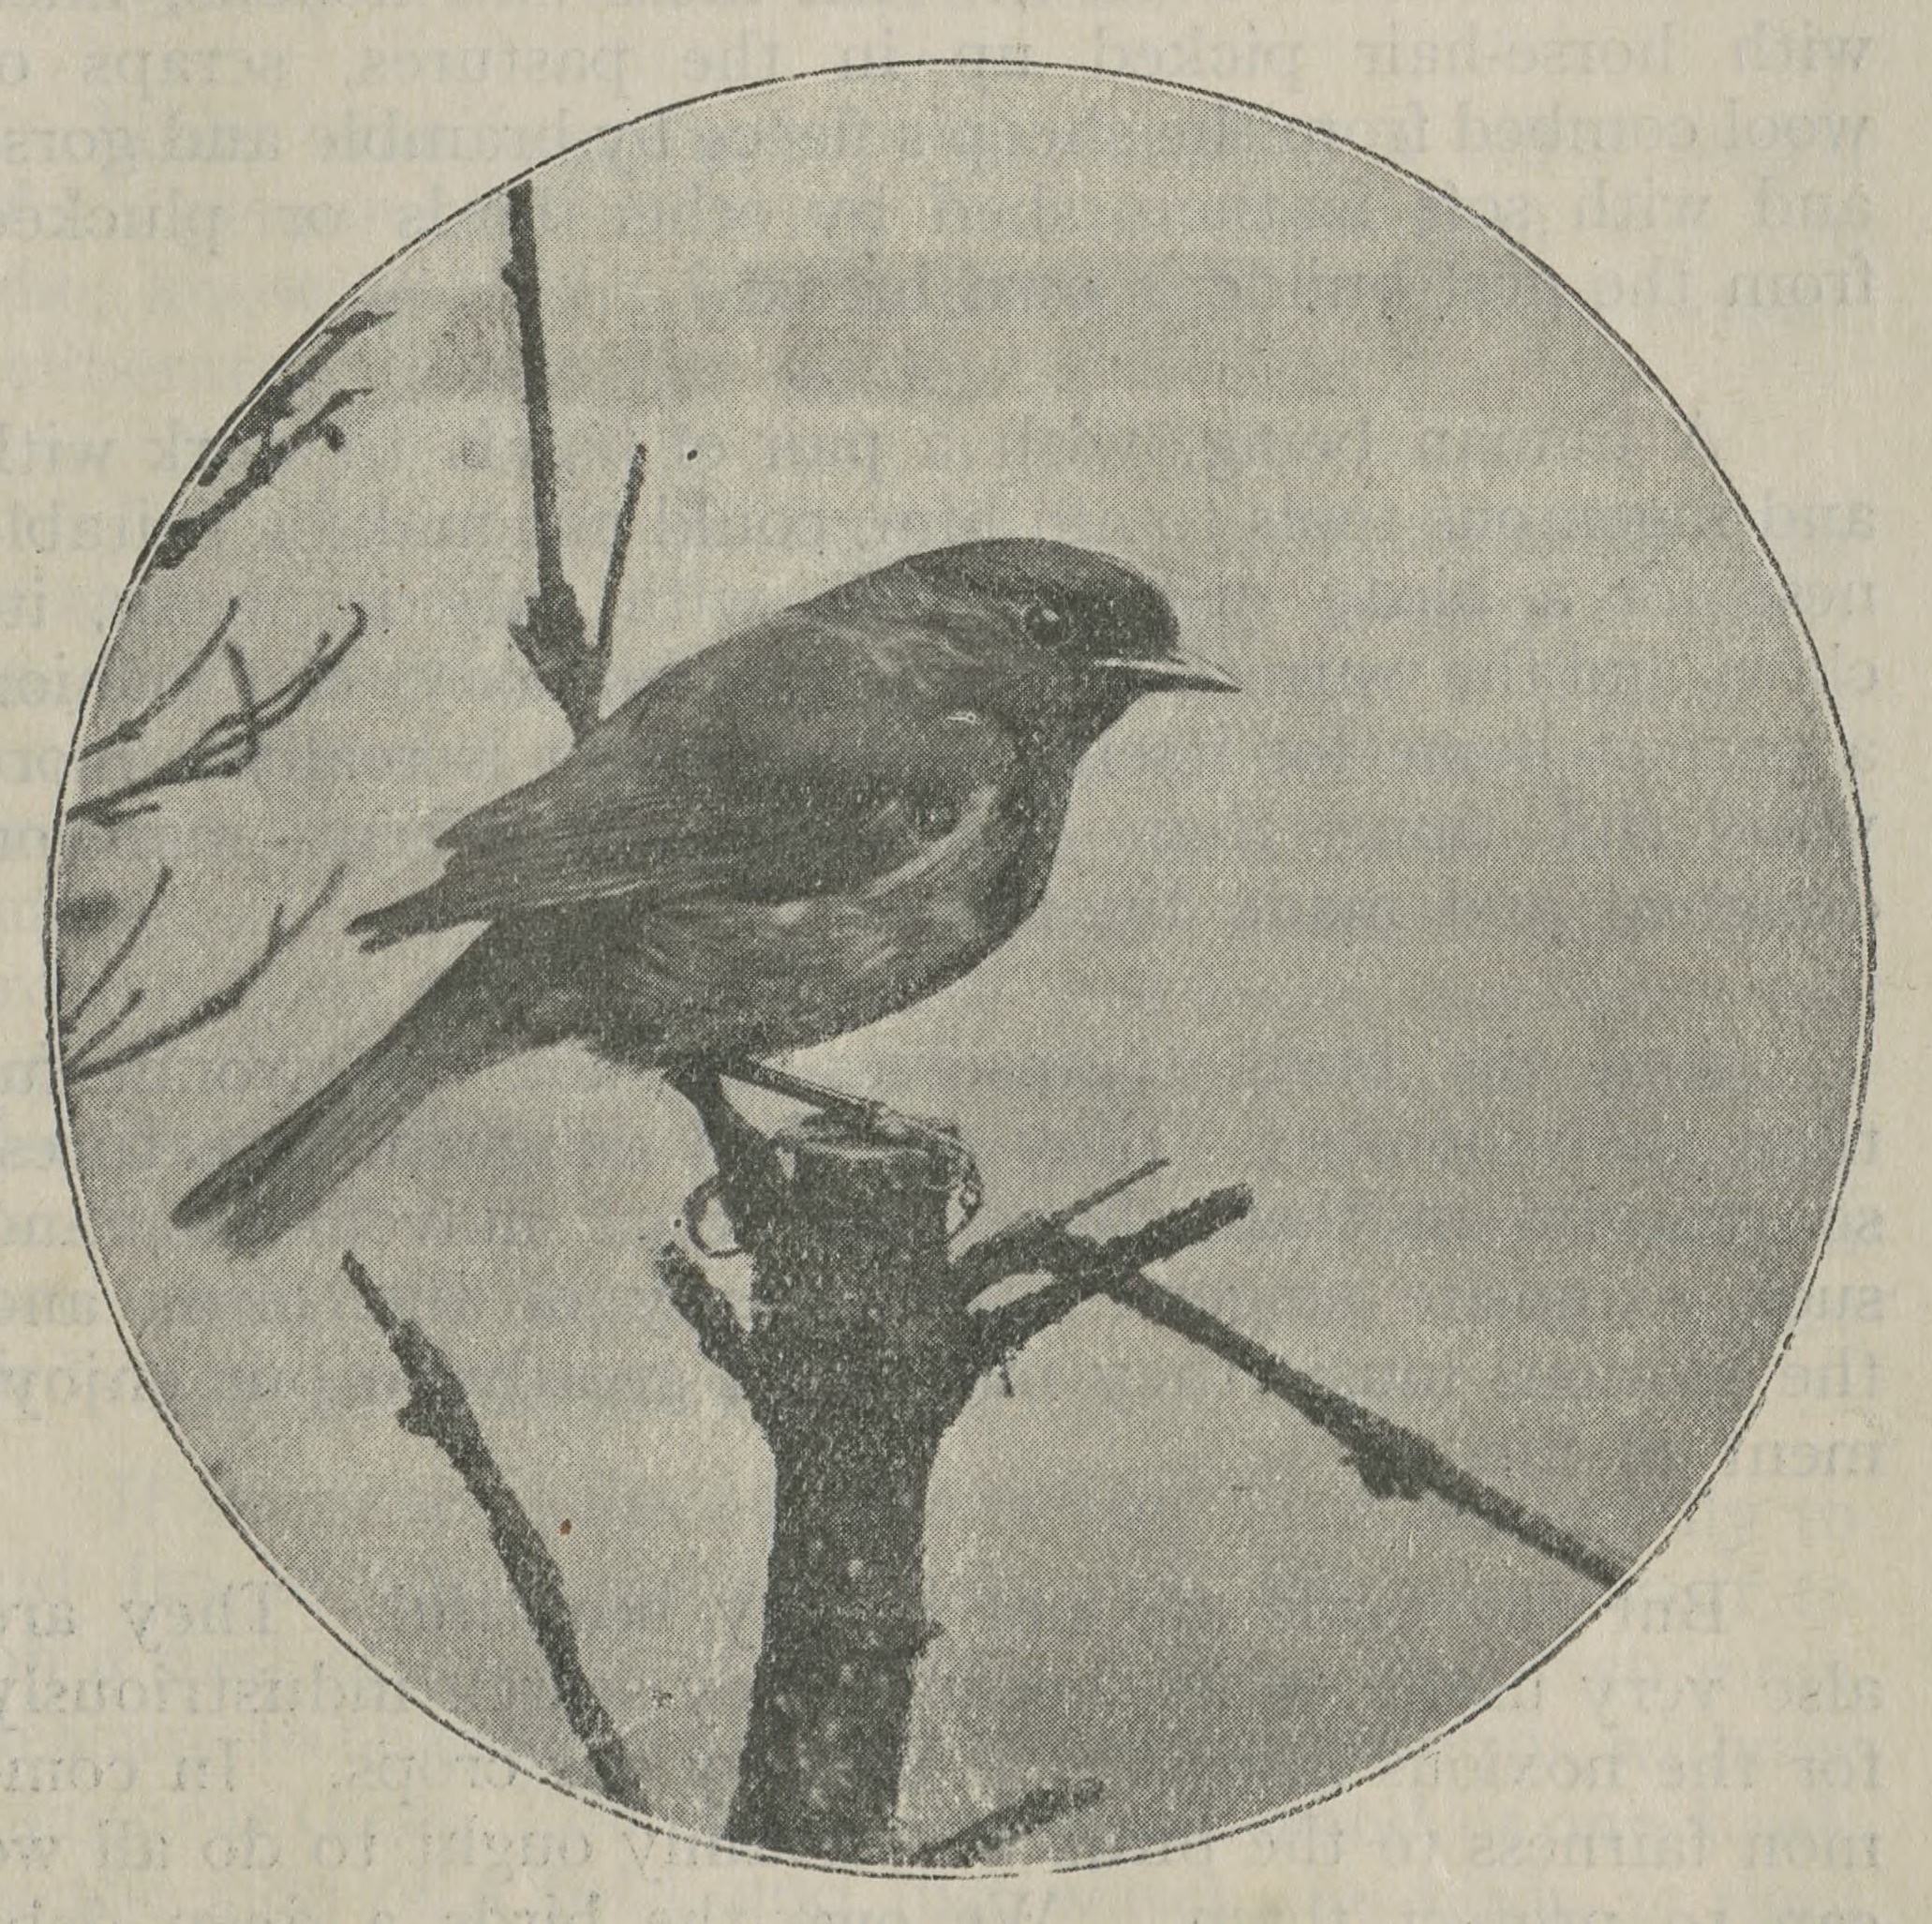 Small song bird perched on a branch, from the cover of "Robbing the Birds," a pamphlet published by the Royal Society for the Protection of Birds (date unknown).